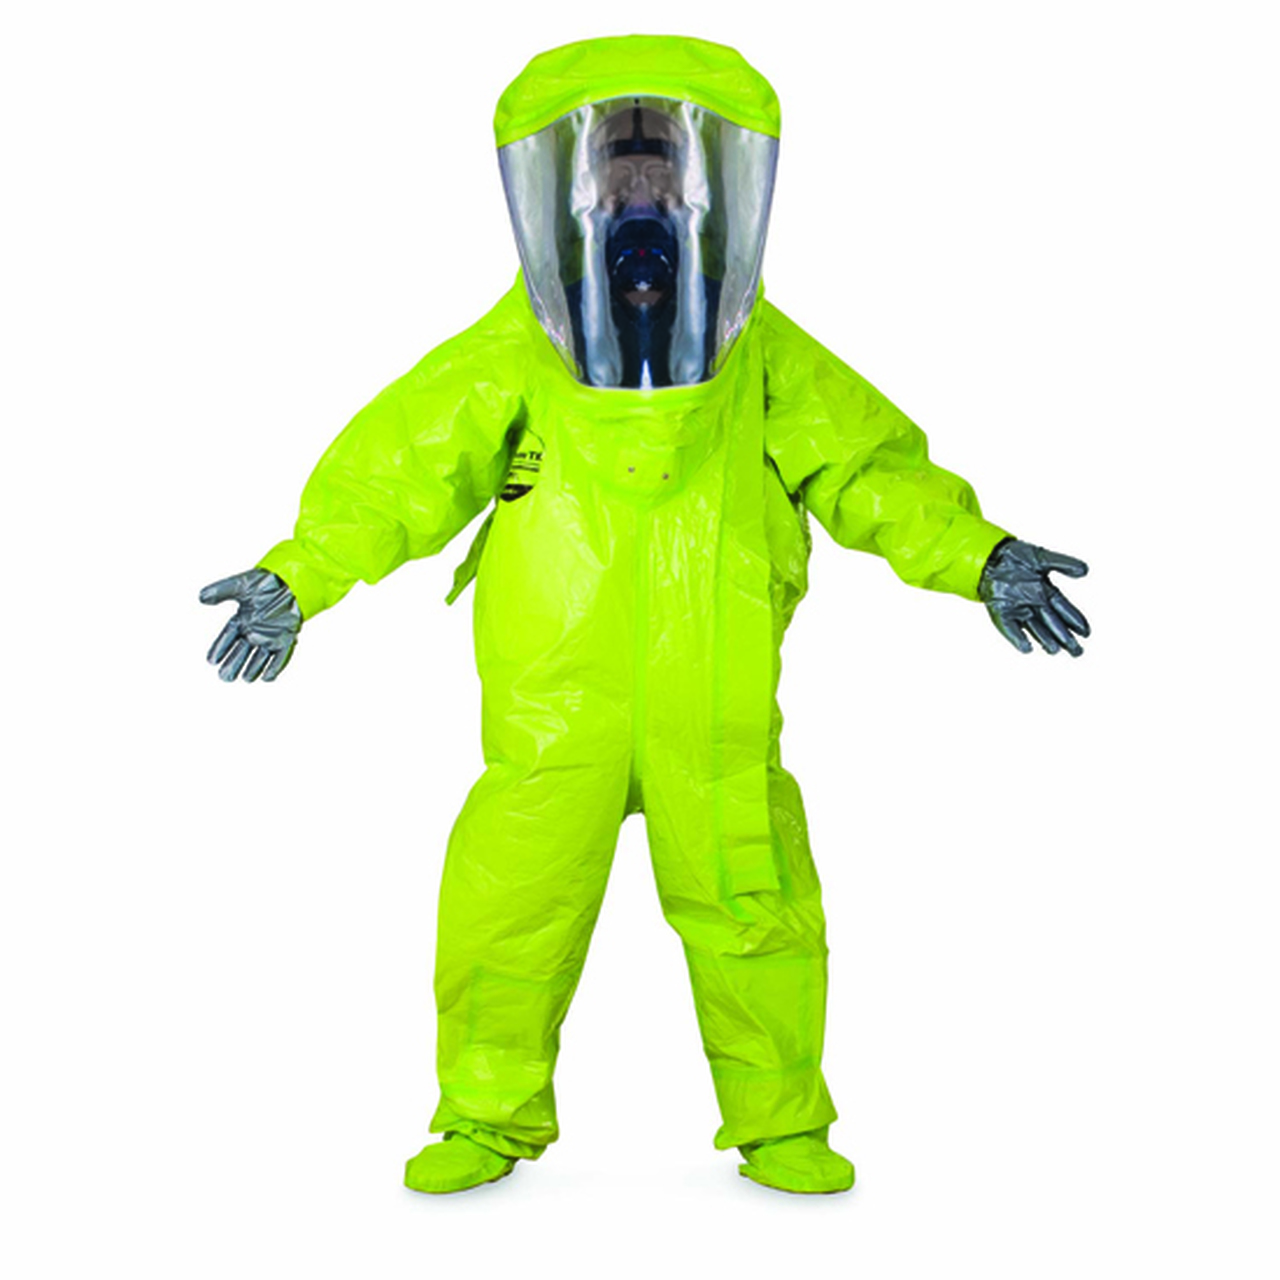 How to Choose a Hazmat Suit - PK Safety Supply